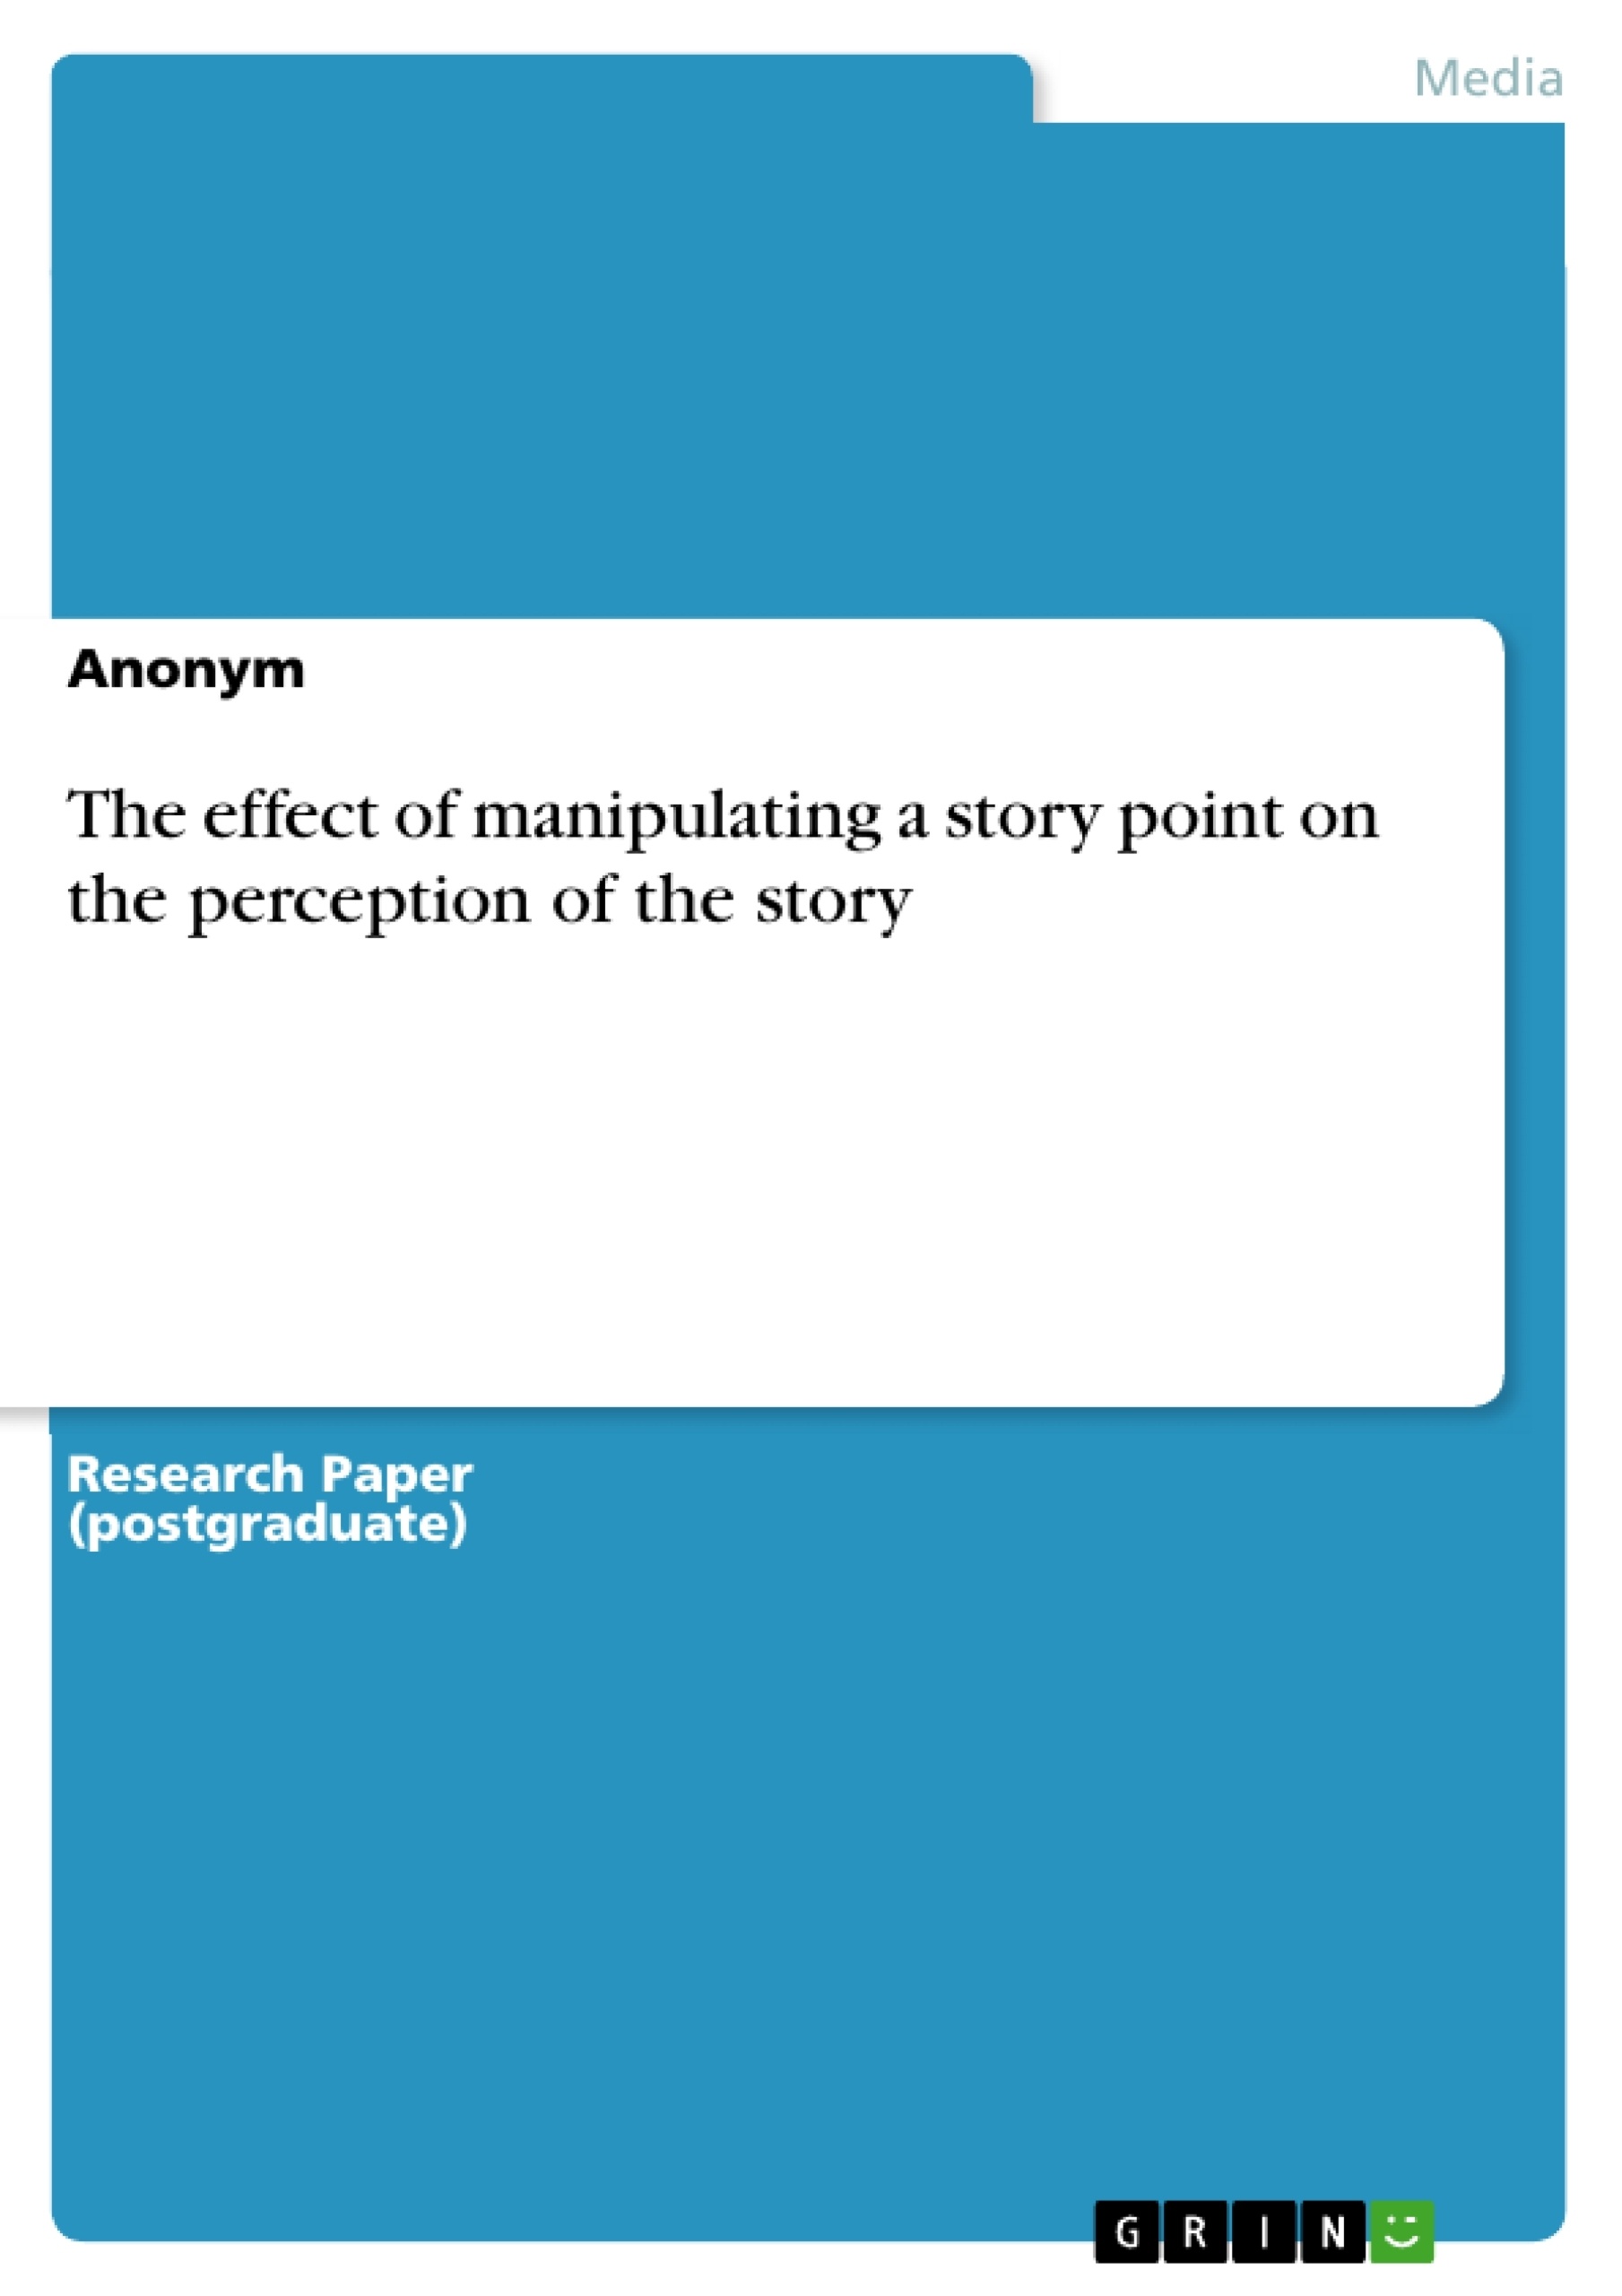 Titel: The effect of manipulating a story point  on the perception of the story